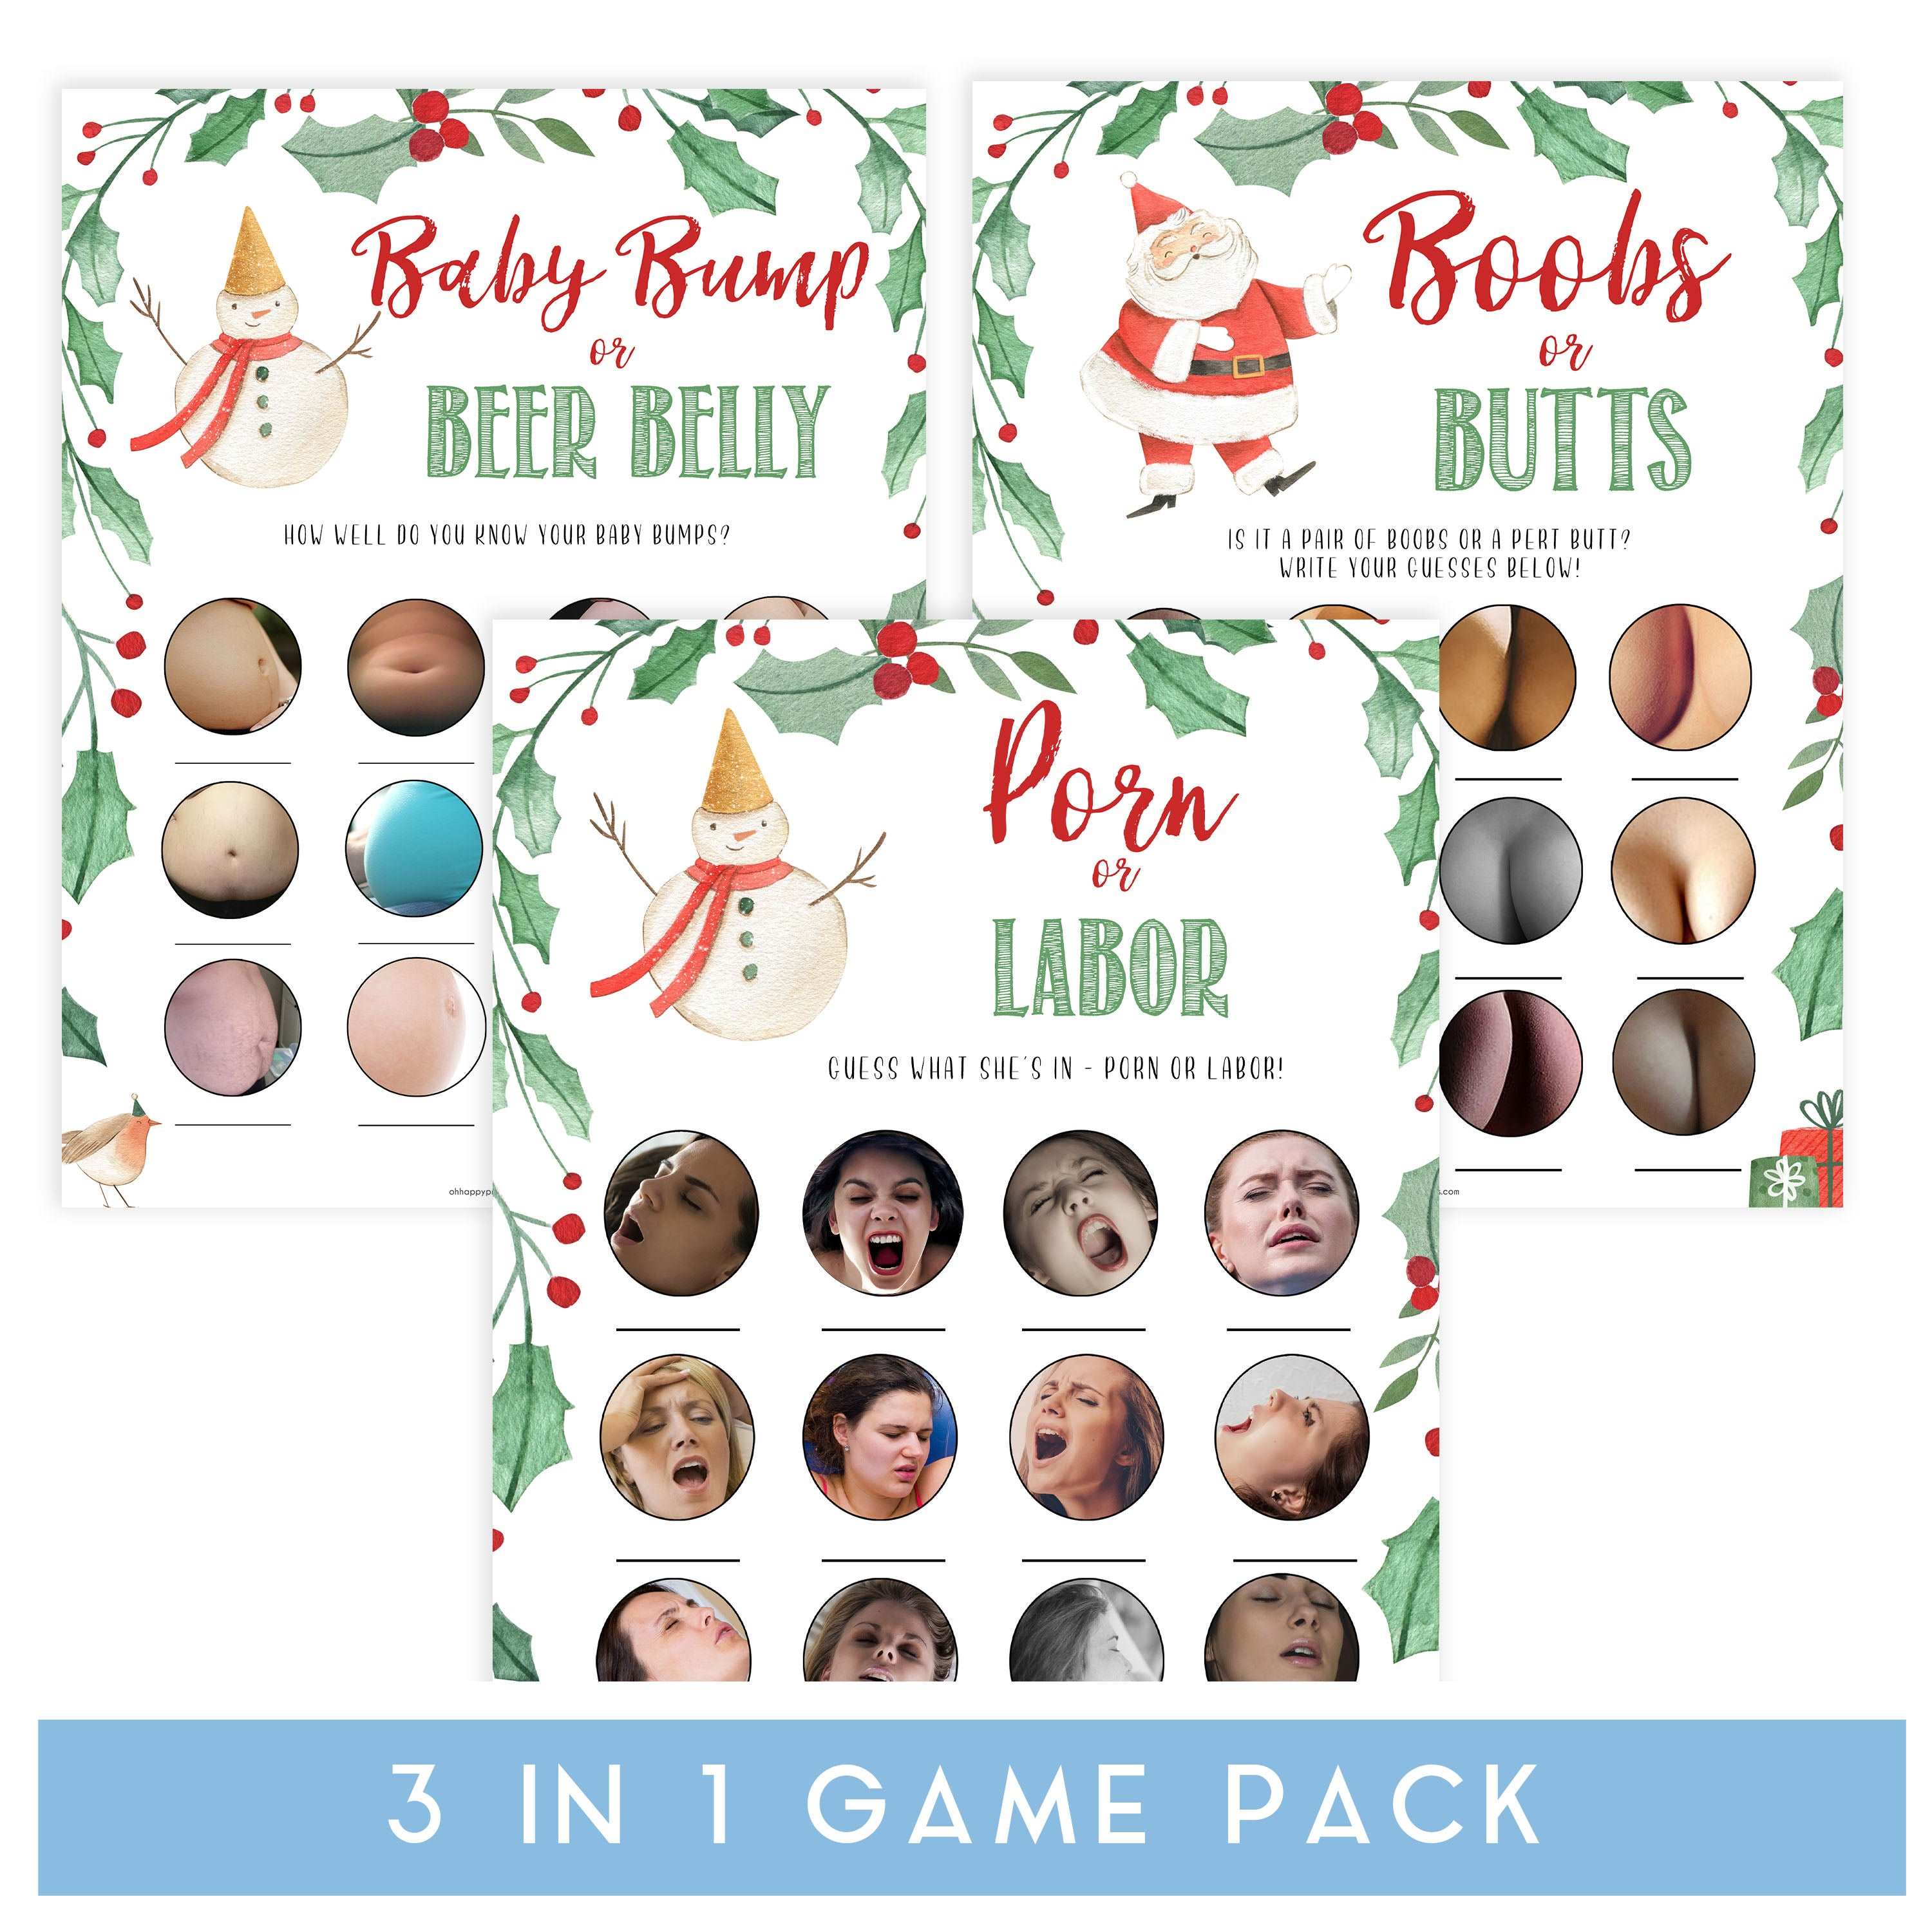 Christmas baby shower games, 3 baby shower games, festive baby shower games, best baby shower games, top 10 baby games, baby shower ideas, baby shower games